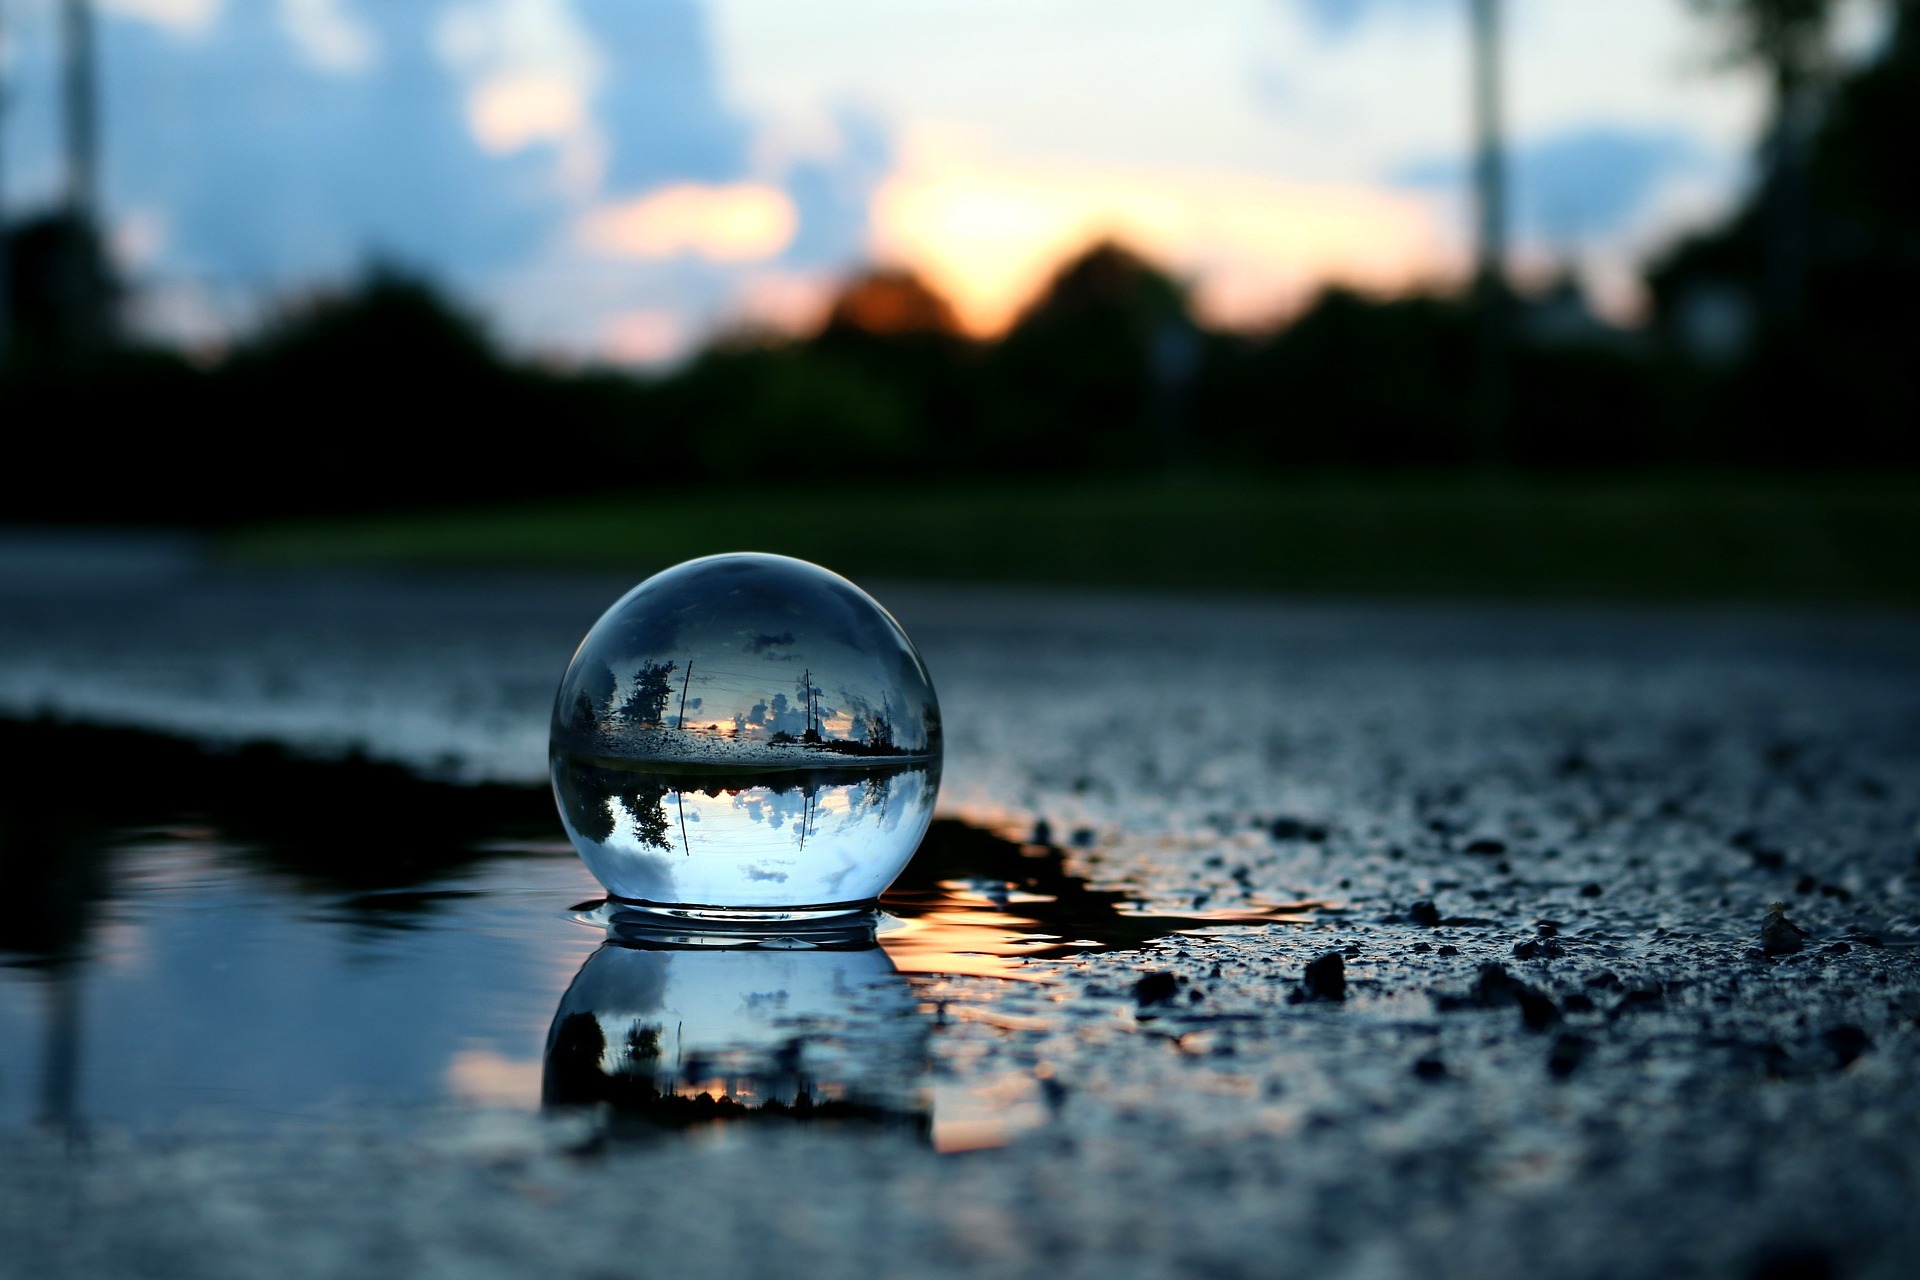 Peering into the Murky Crystal Ball – Part 3